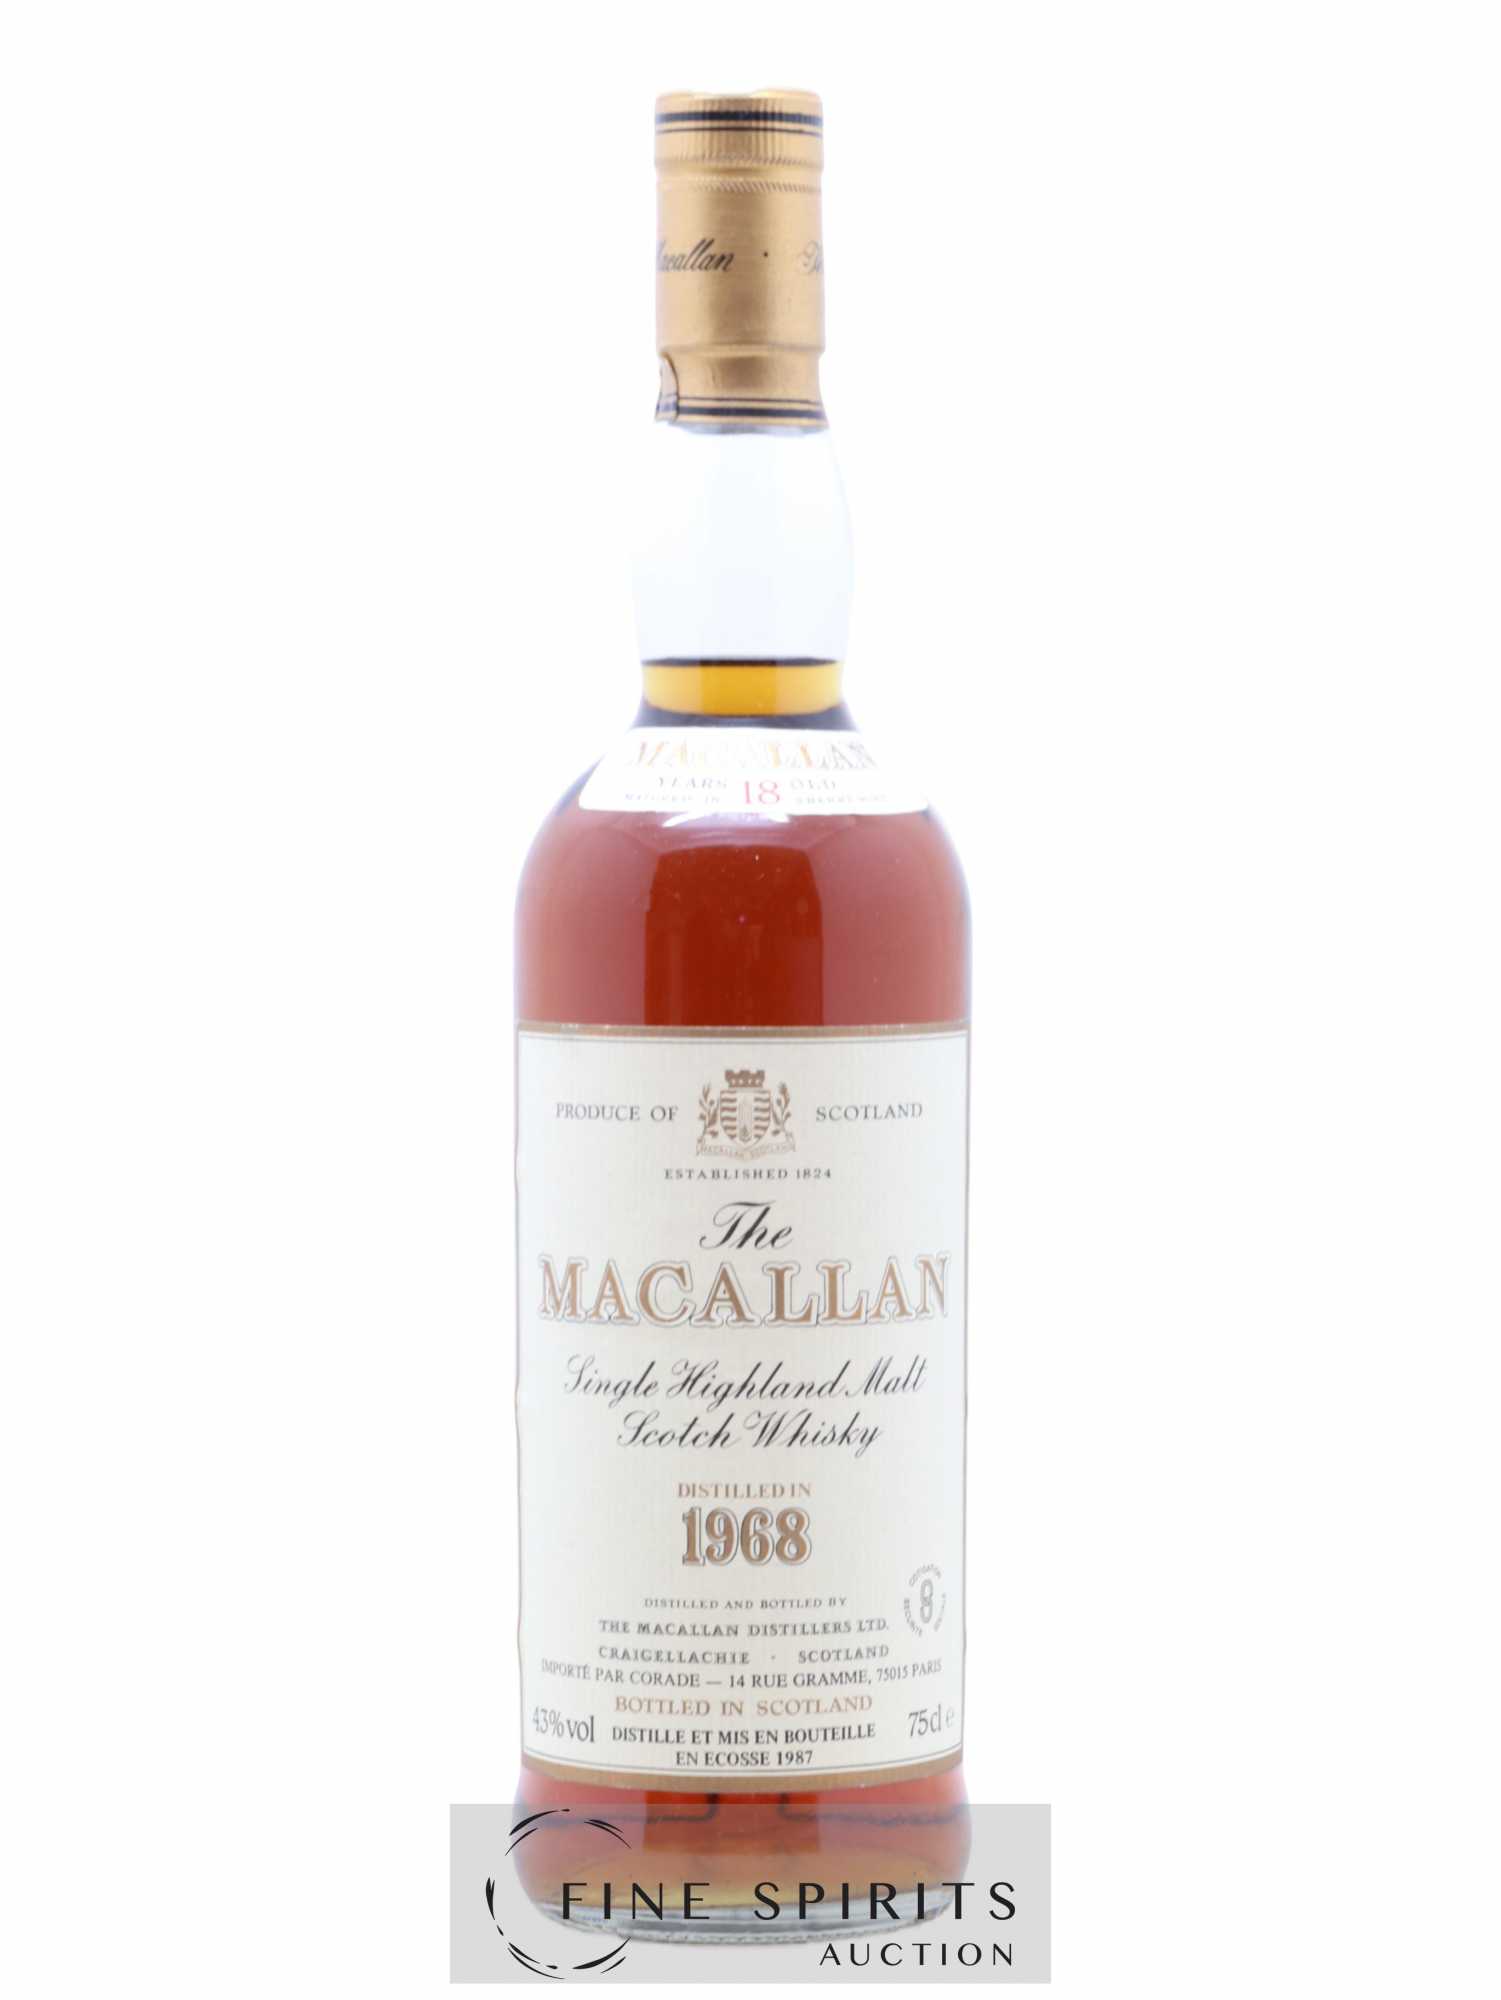 Macallan (The) 18 years 1968 Of. Sherry Wood Matured - bottled 1987 Corade Import 